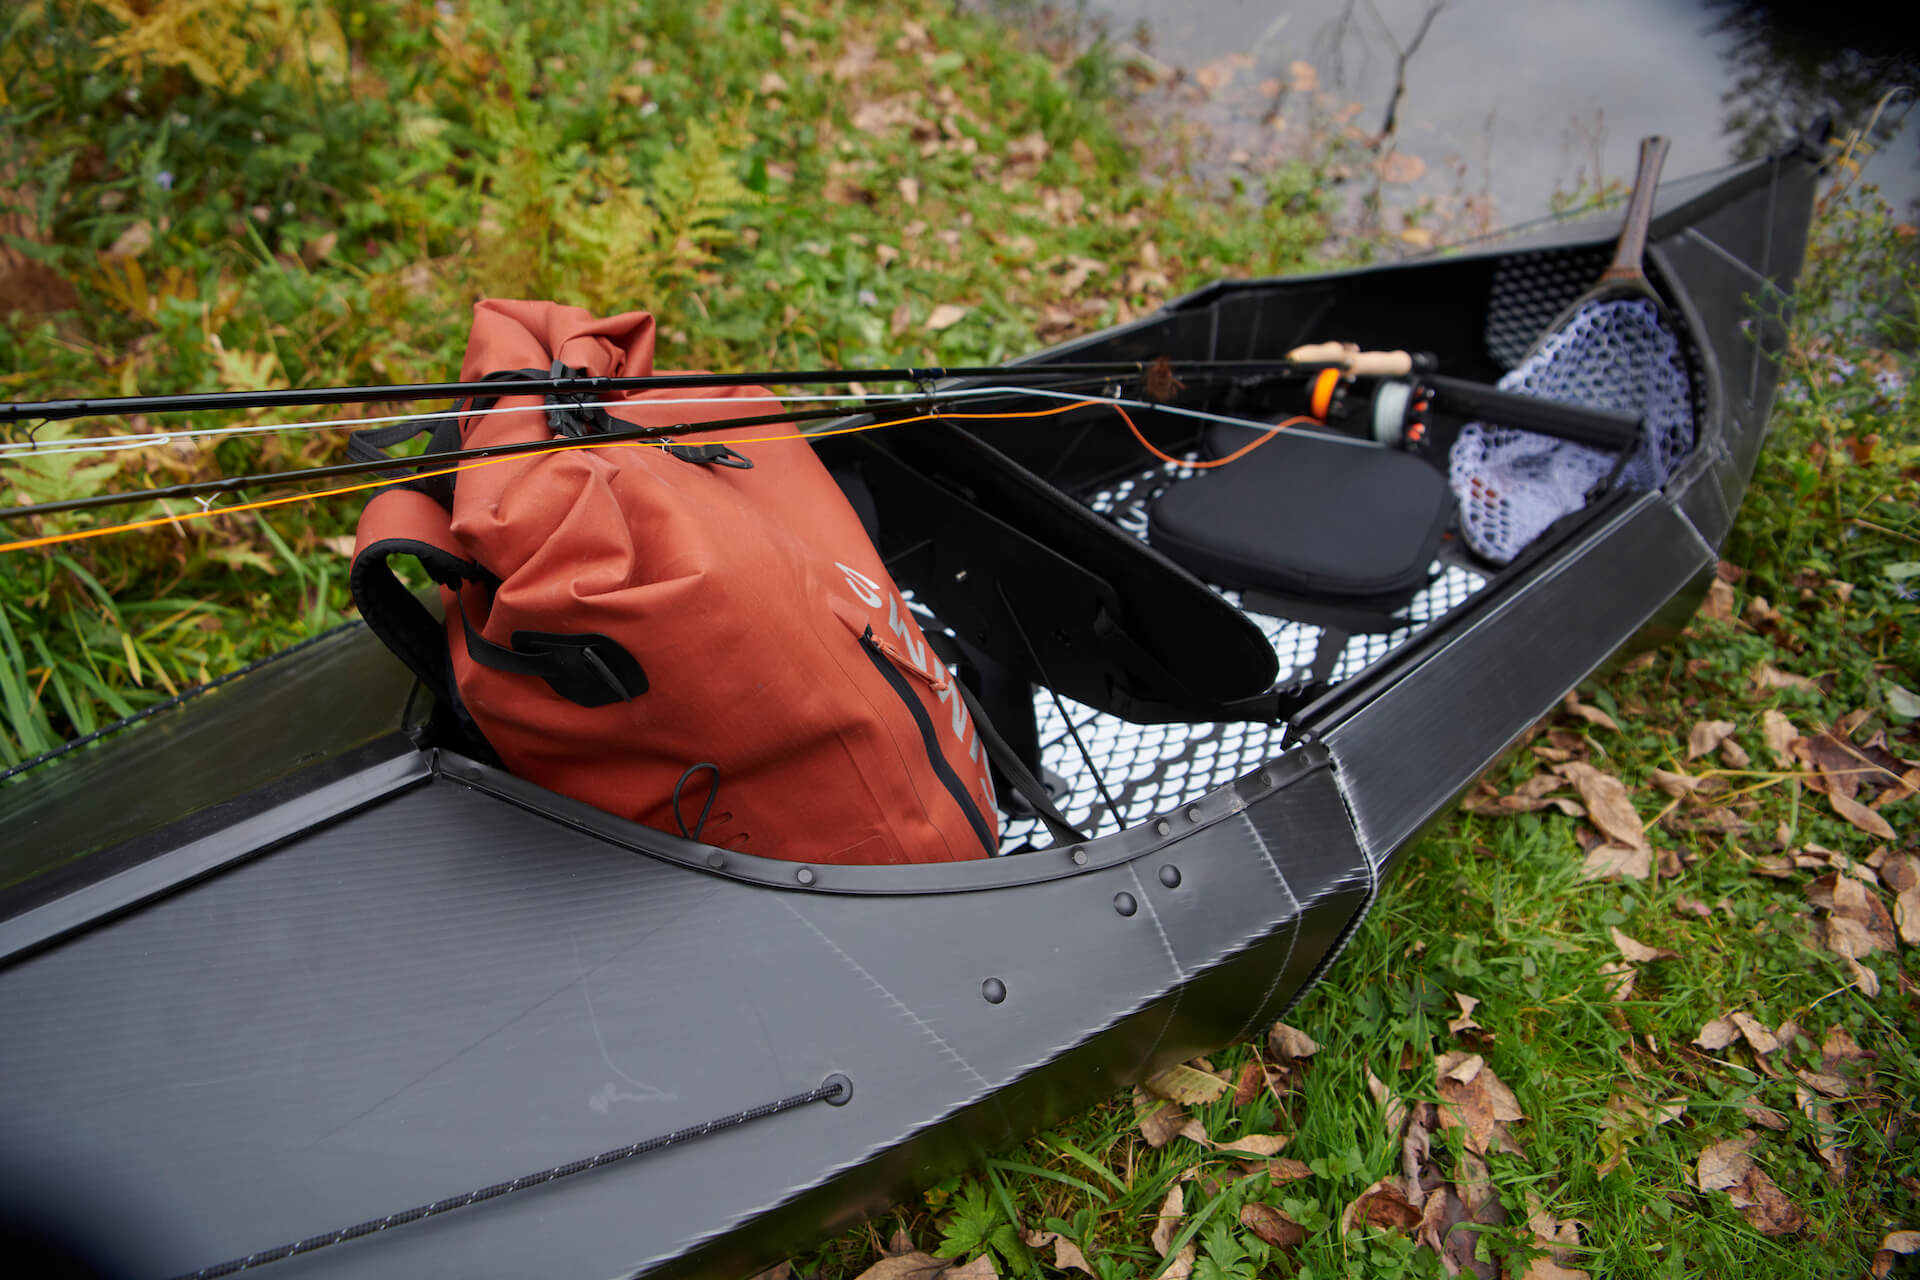 The Oru Beach kayak loaded with fly fishing gear